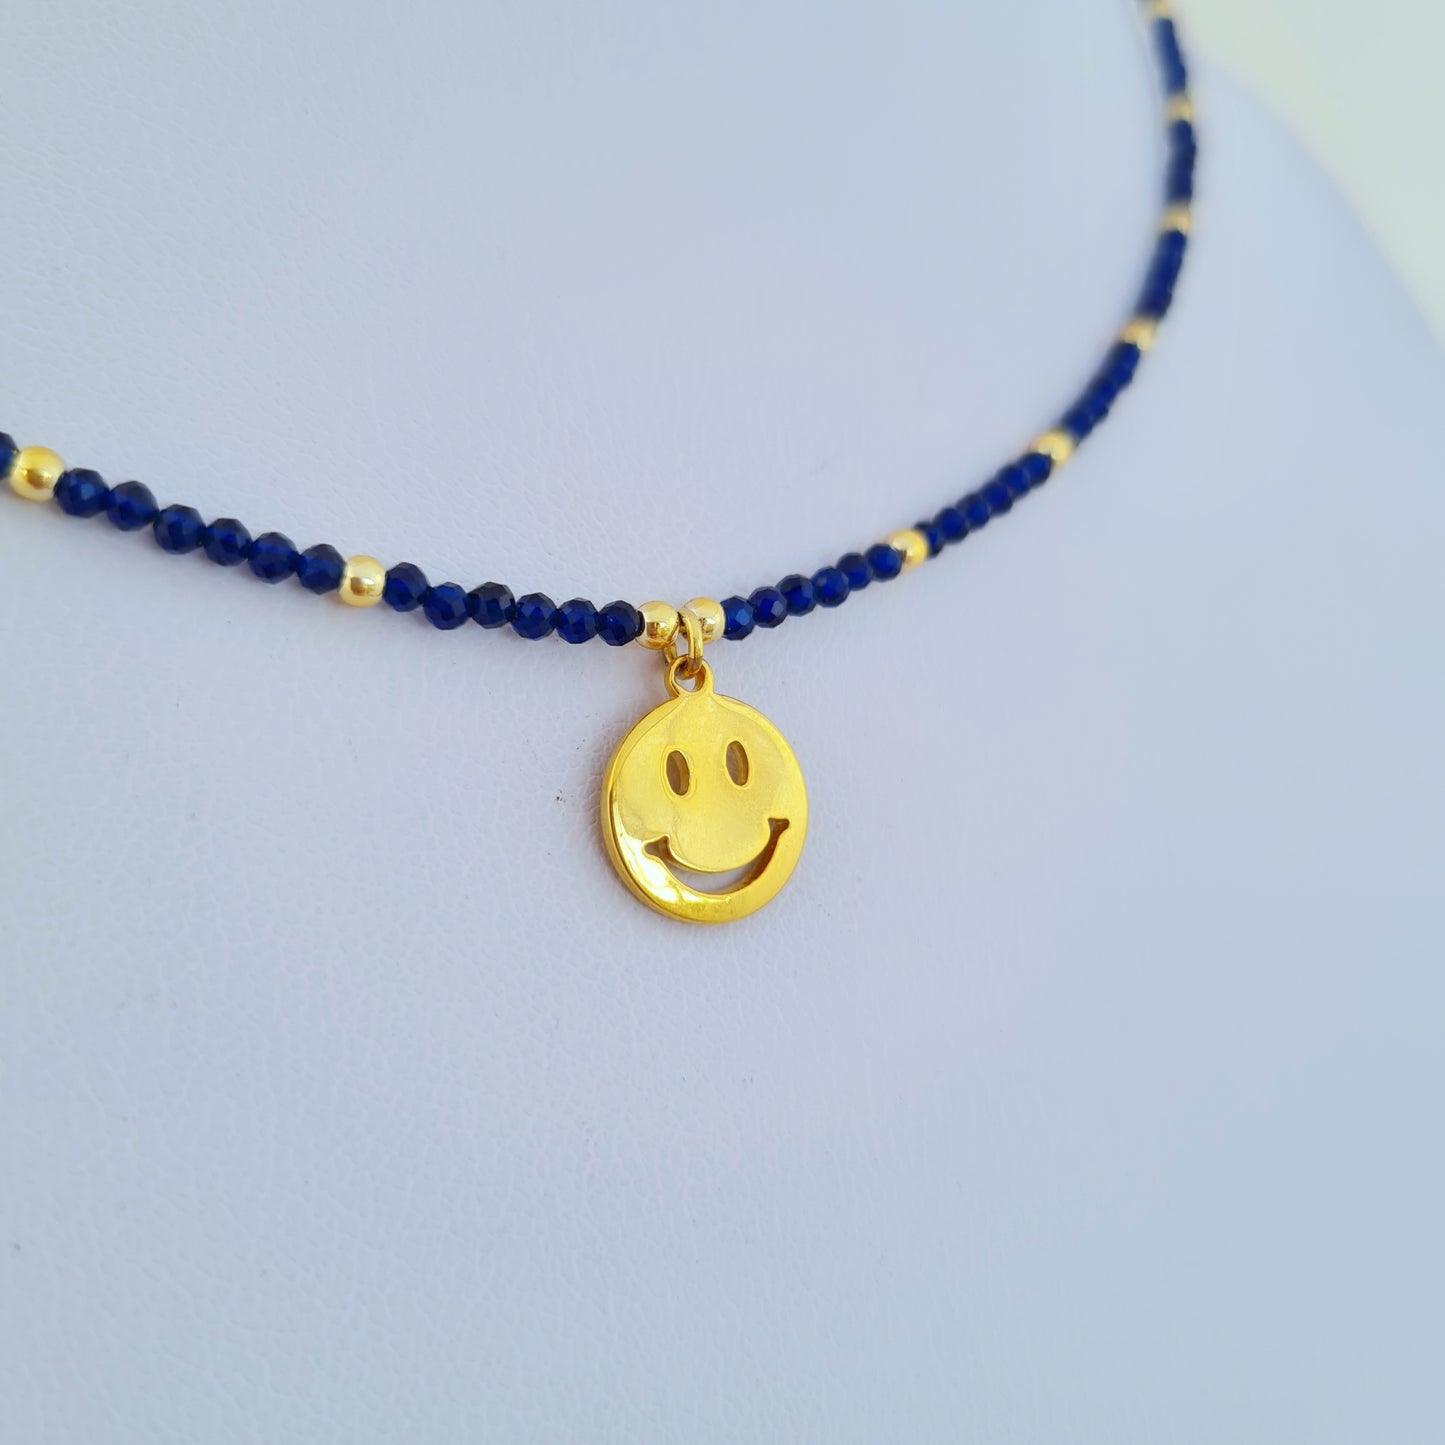 Smiley choker necklace